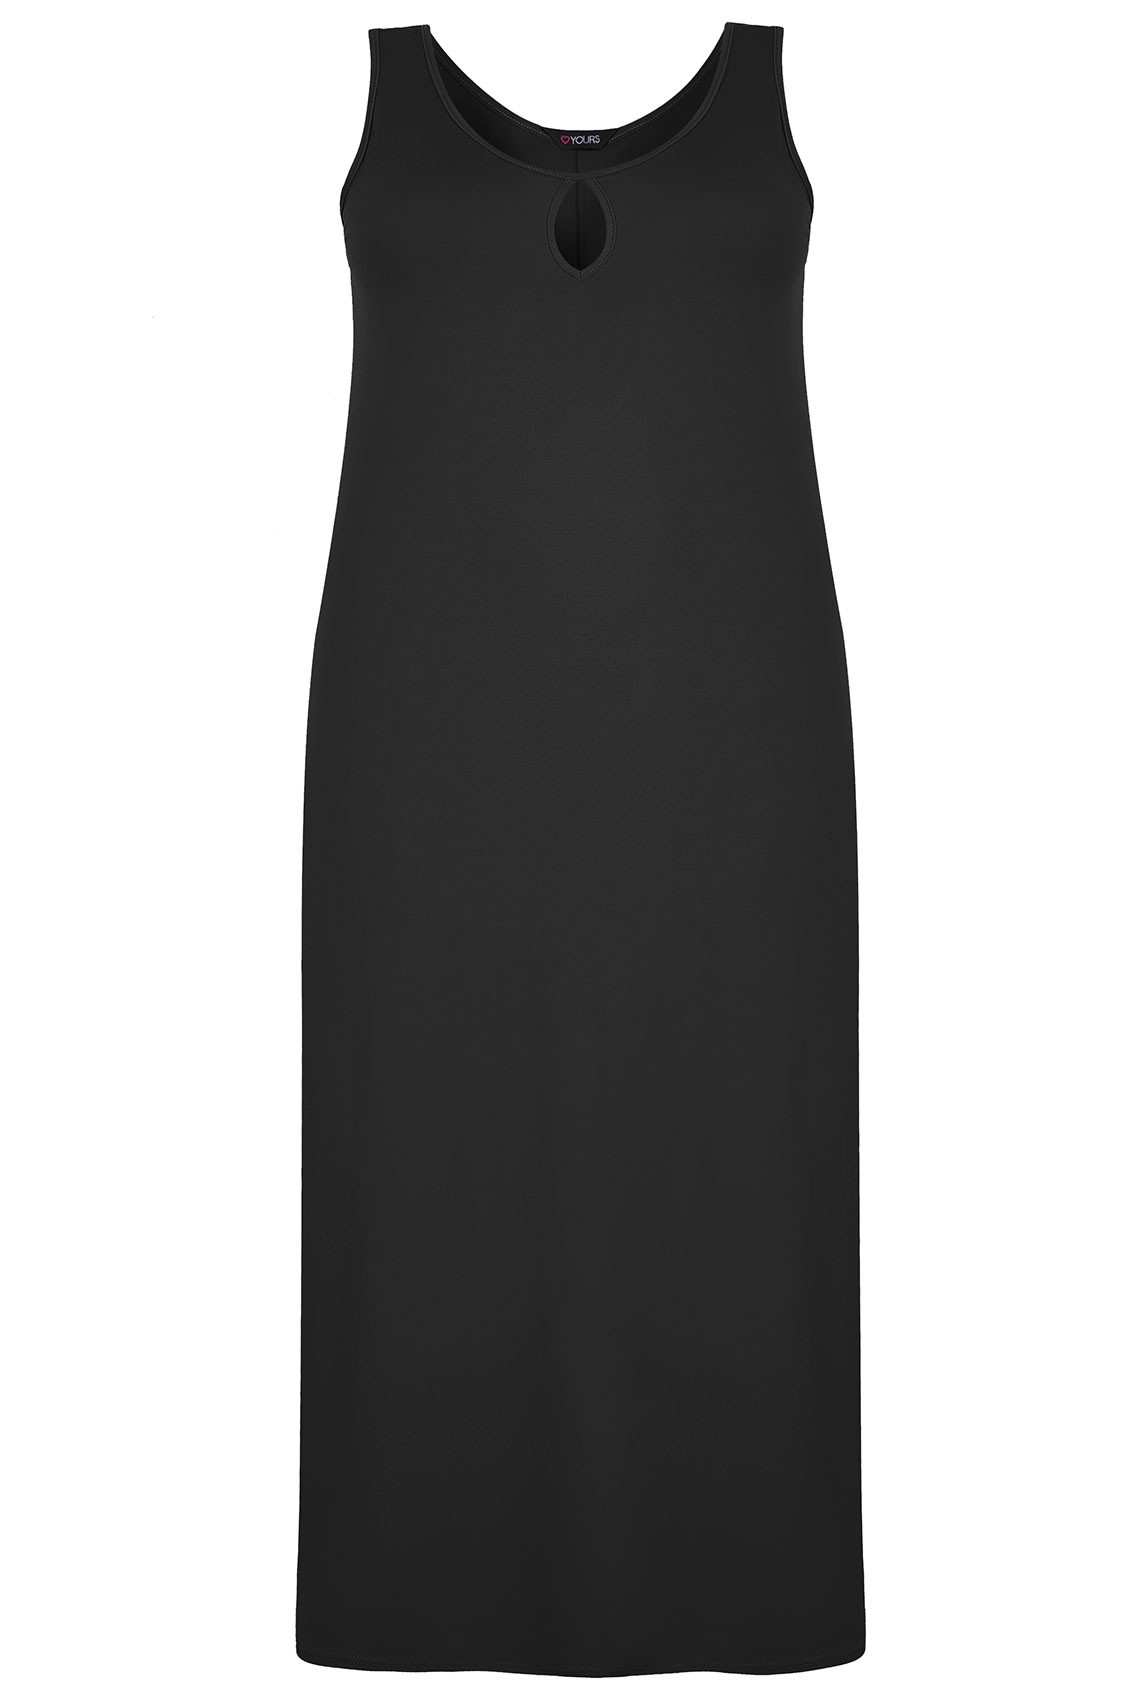 Black Jersey Maxi Dress With Keyhole Detail, Plus size 16 to 36